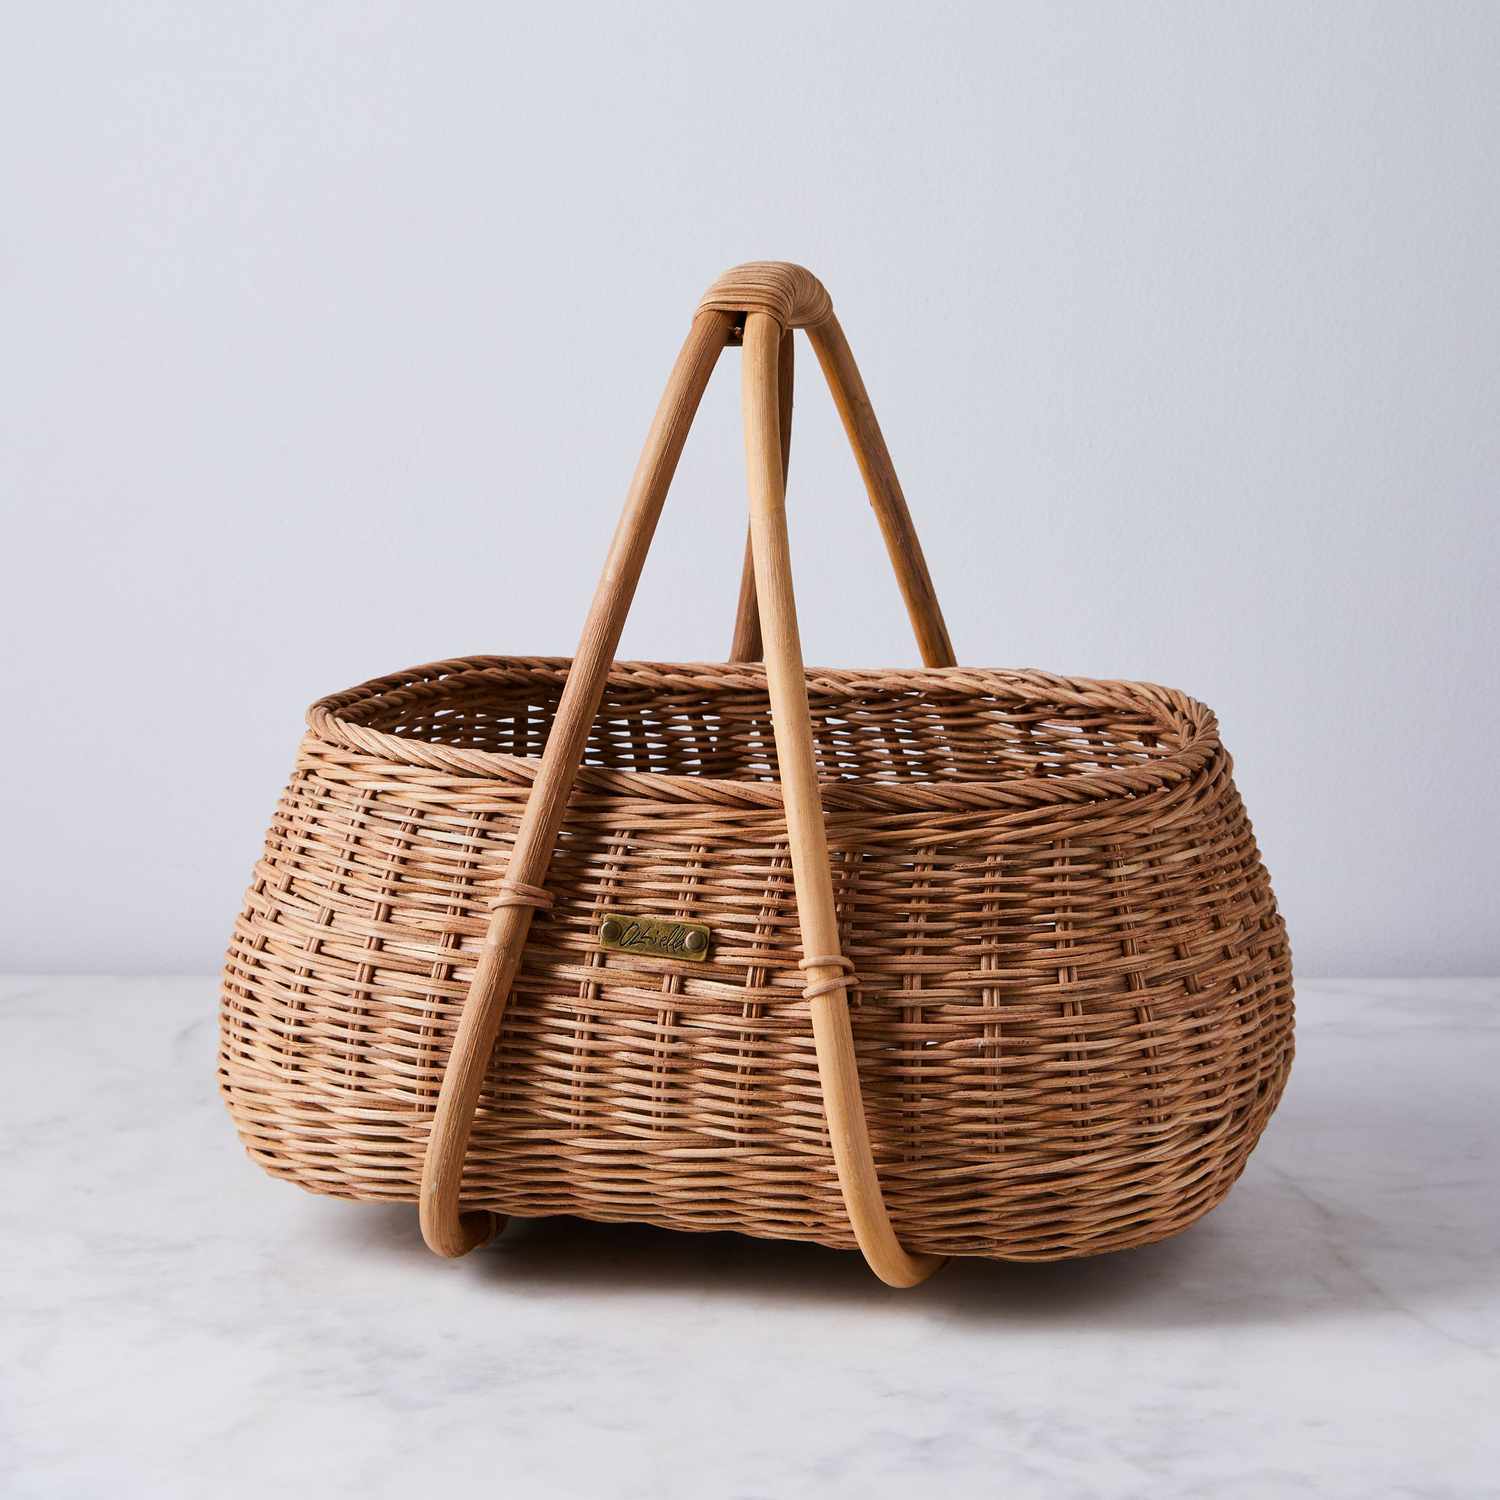 Display a Chic Basket